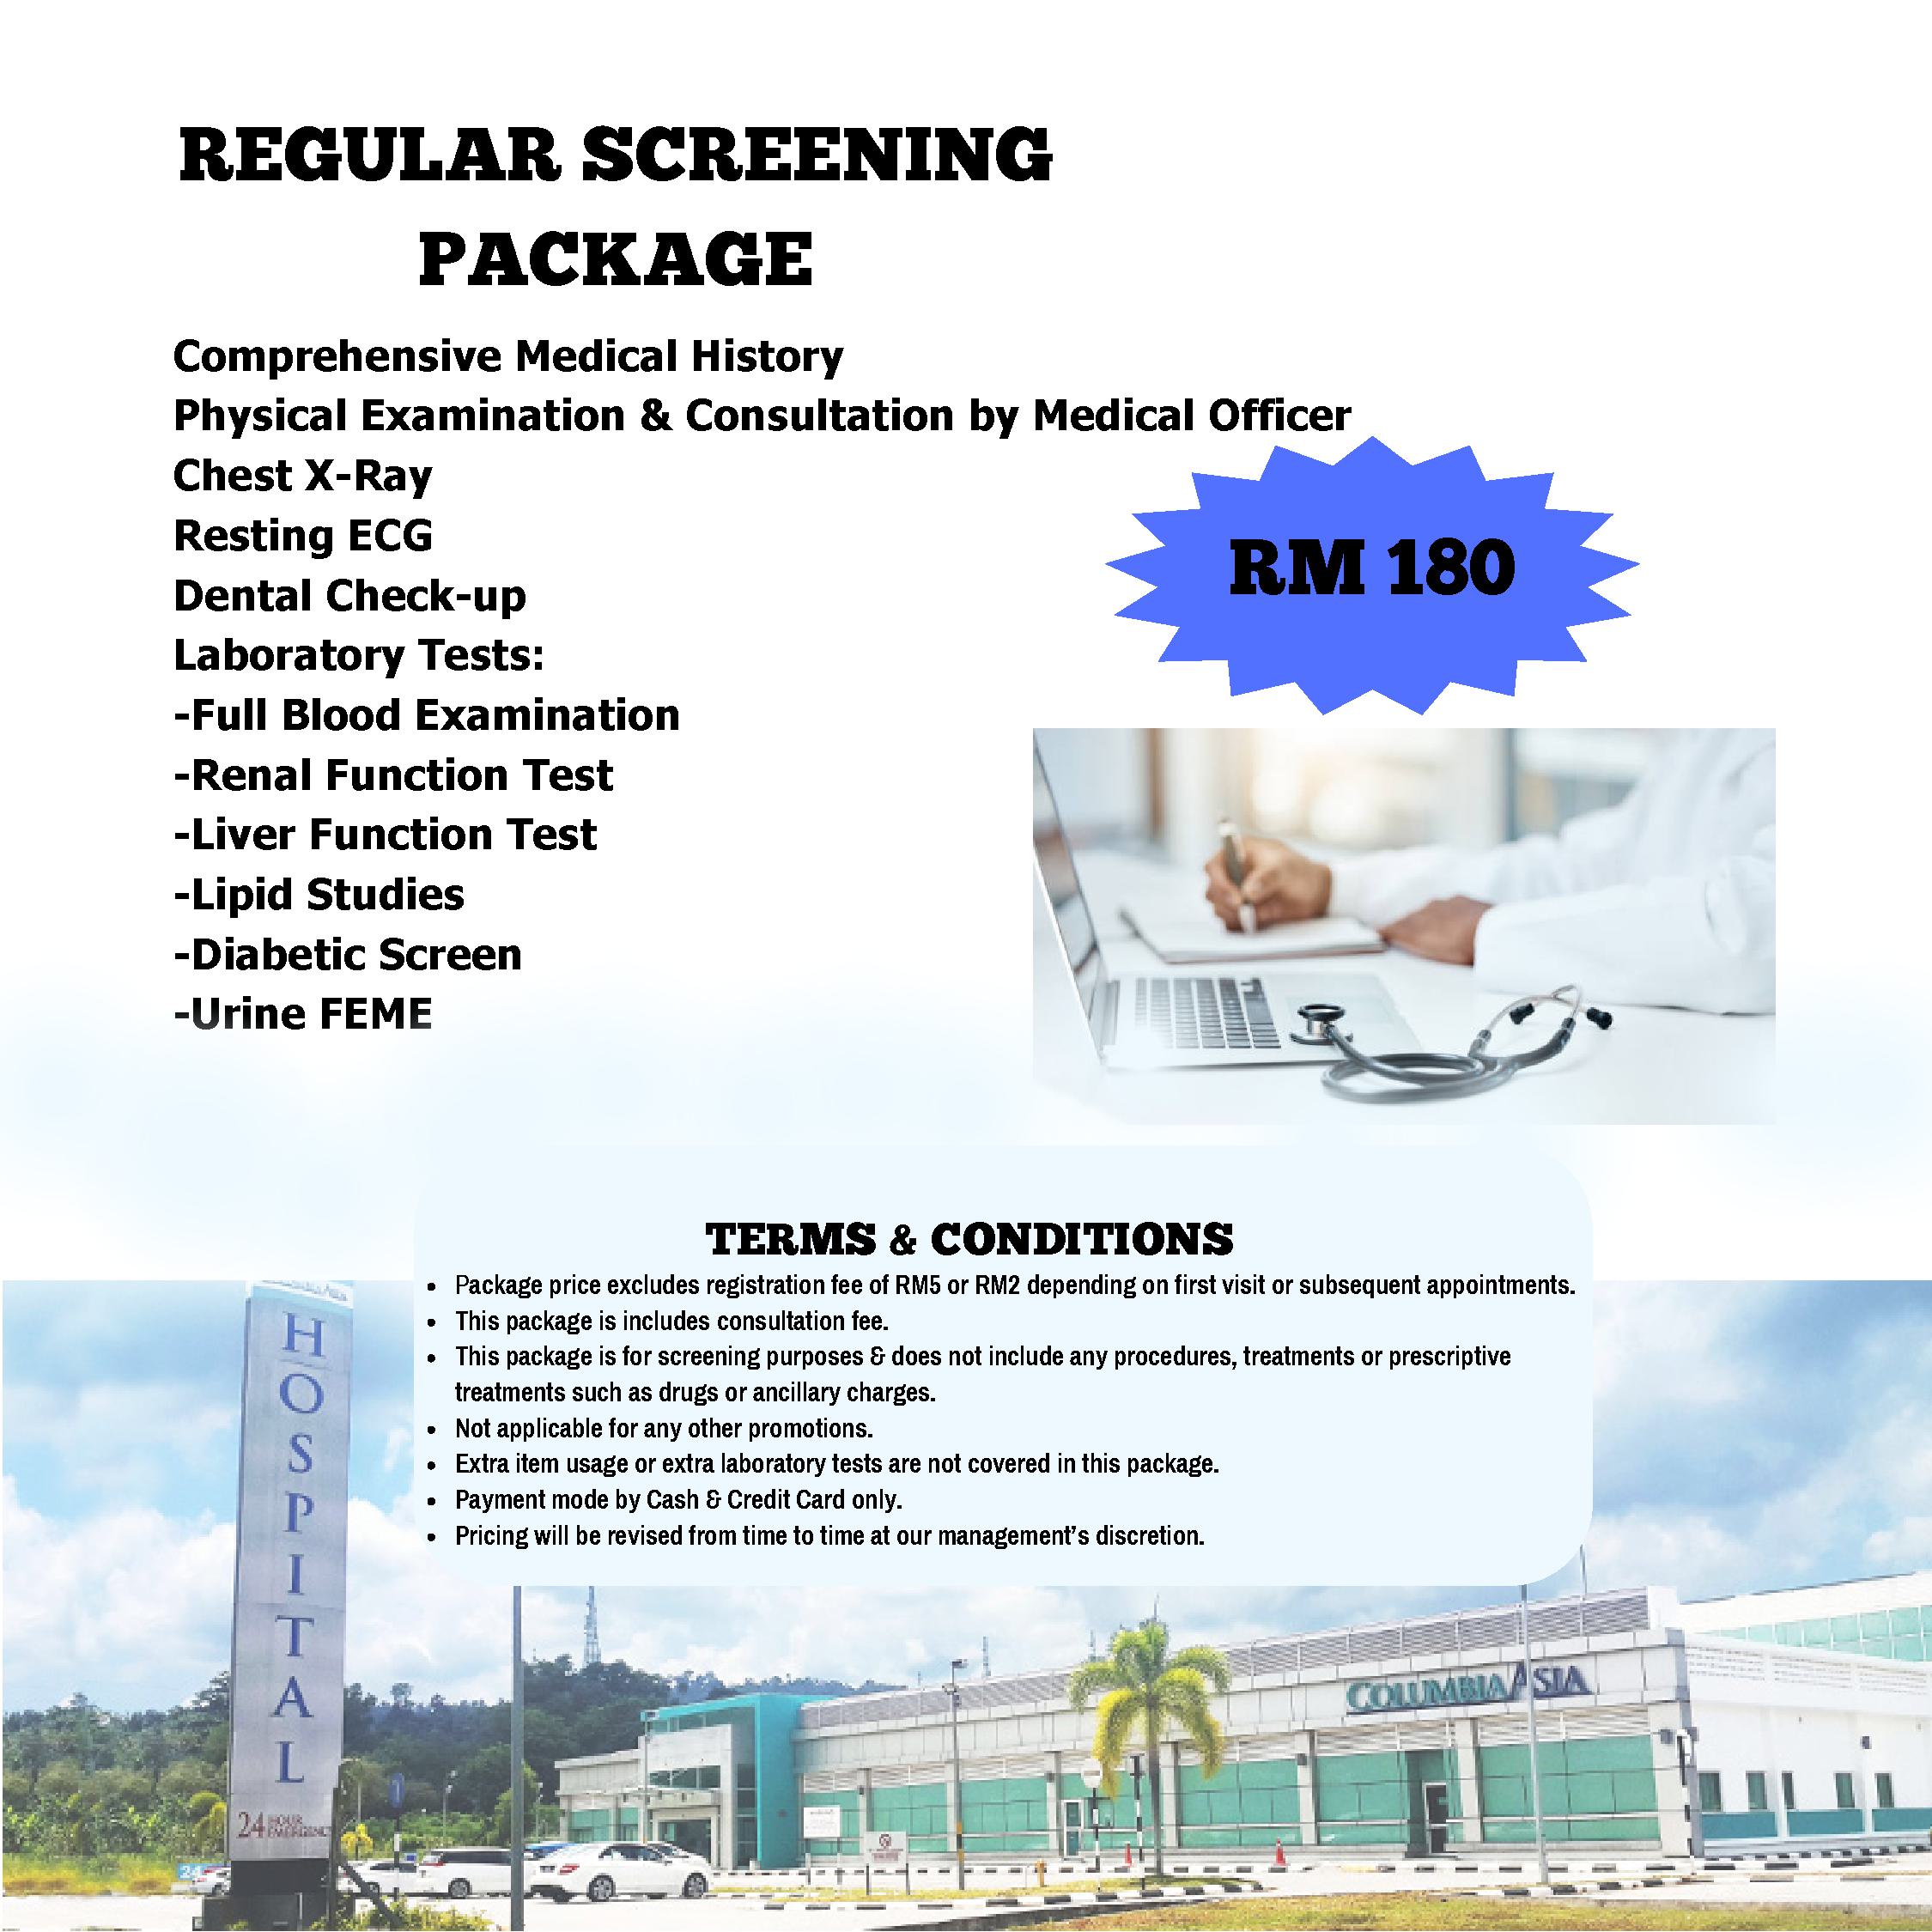 Health Screening Package - Columbia Asia Hospital I Private Hospital in  Malaysia